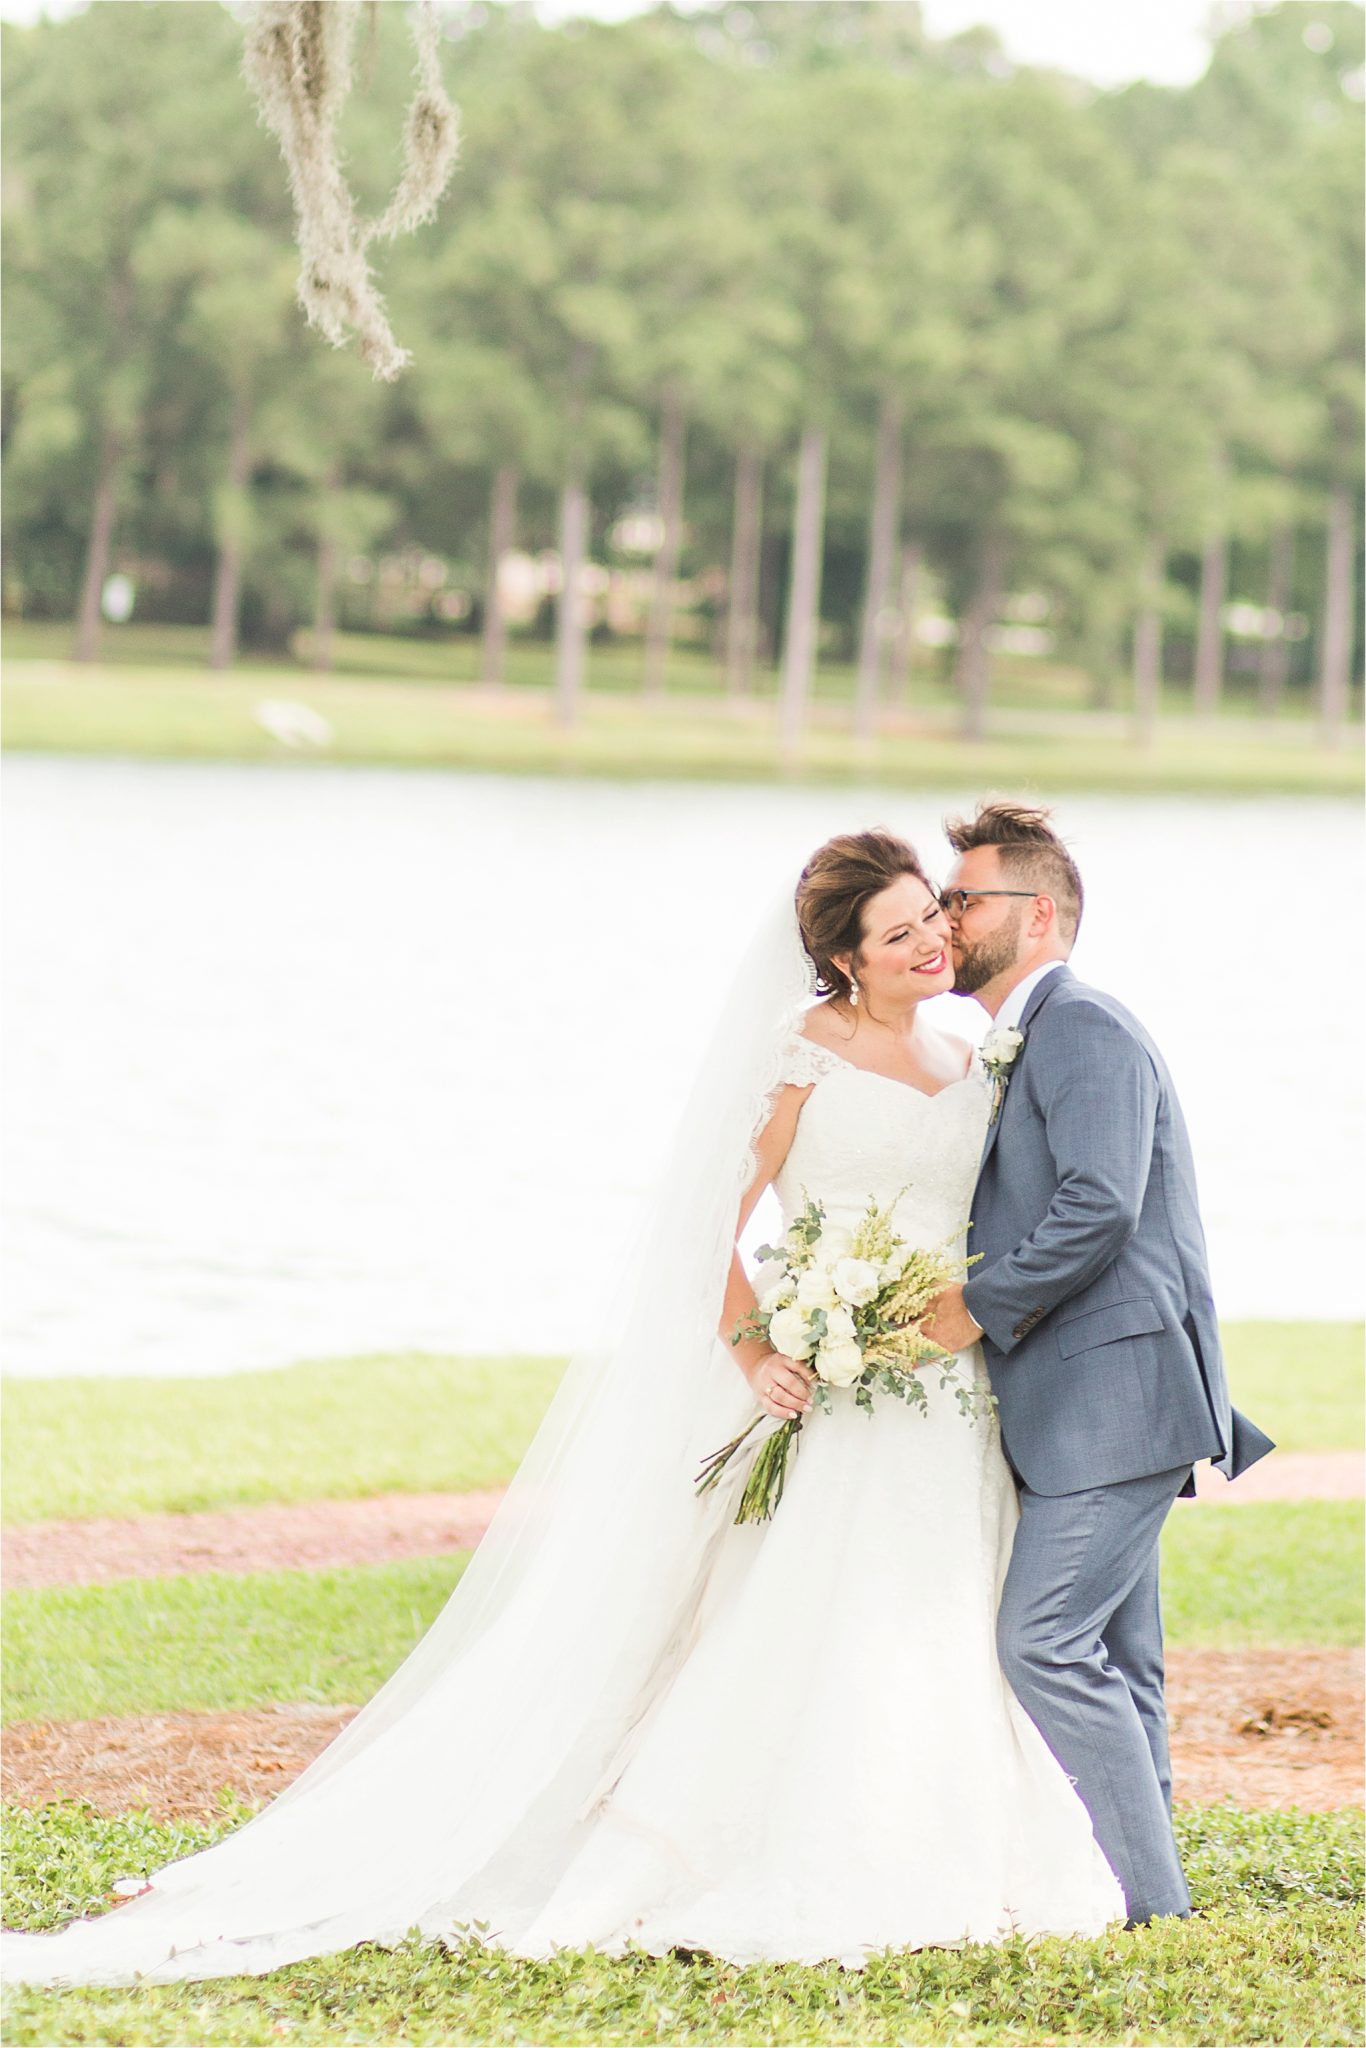 Pastel Themed Wedding-The Chapel at the Waters-Montgomery Alabama Photographer-Miles & Meredyth-Blue Themed Wedding-Bride Bouquet-Wedding Dress